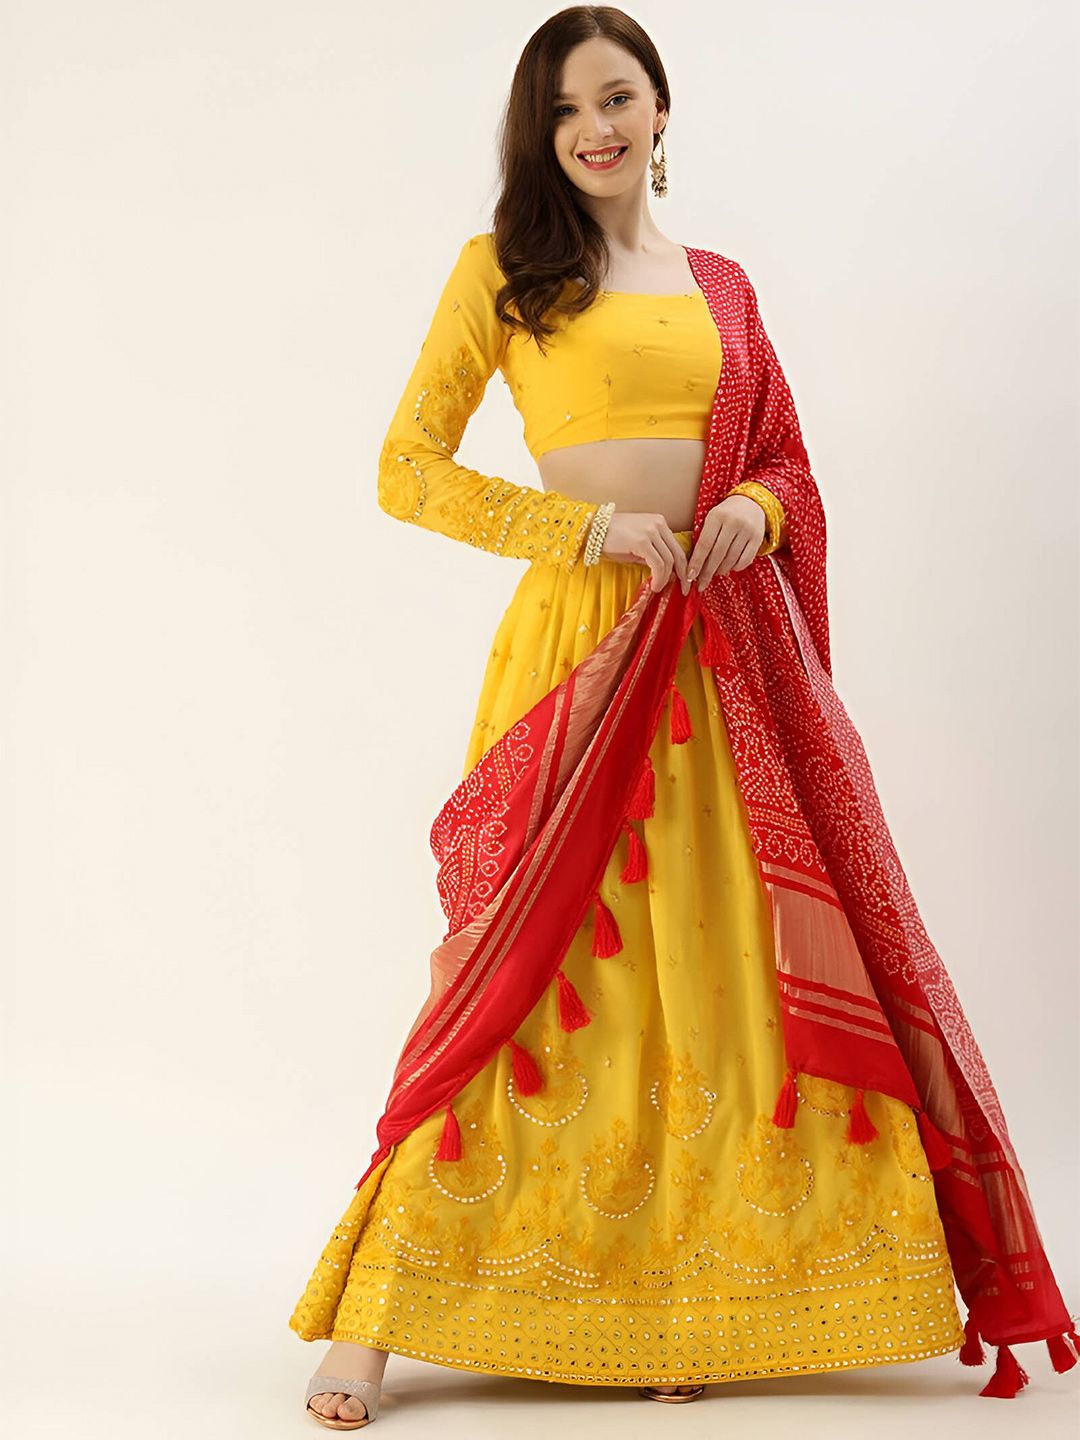 UDBHAV TEXTILE Sequinned Semi-Stitched Lehenga & Unstitched Blouse With Dupatta Price in India